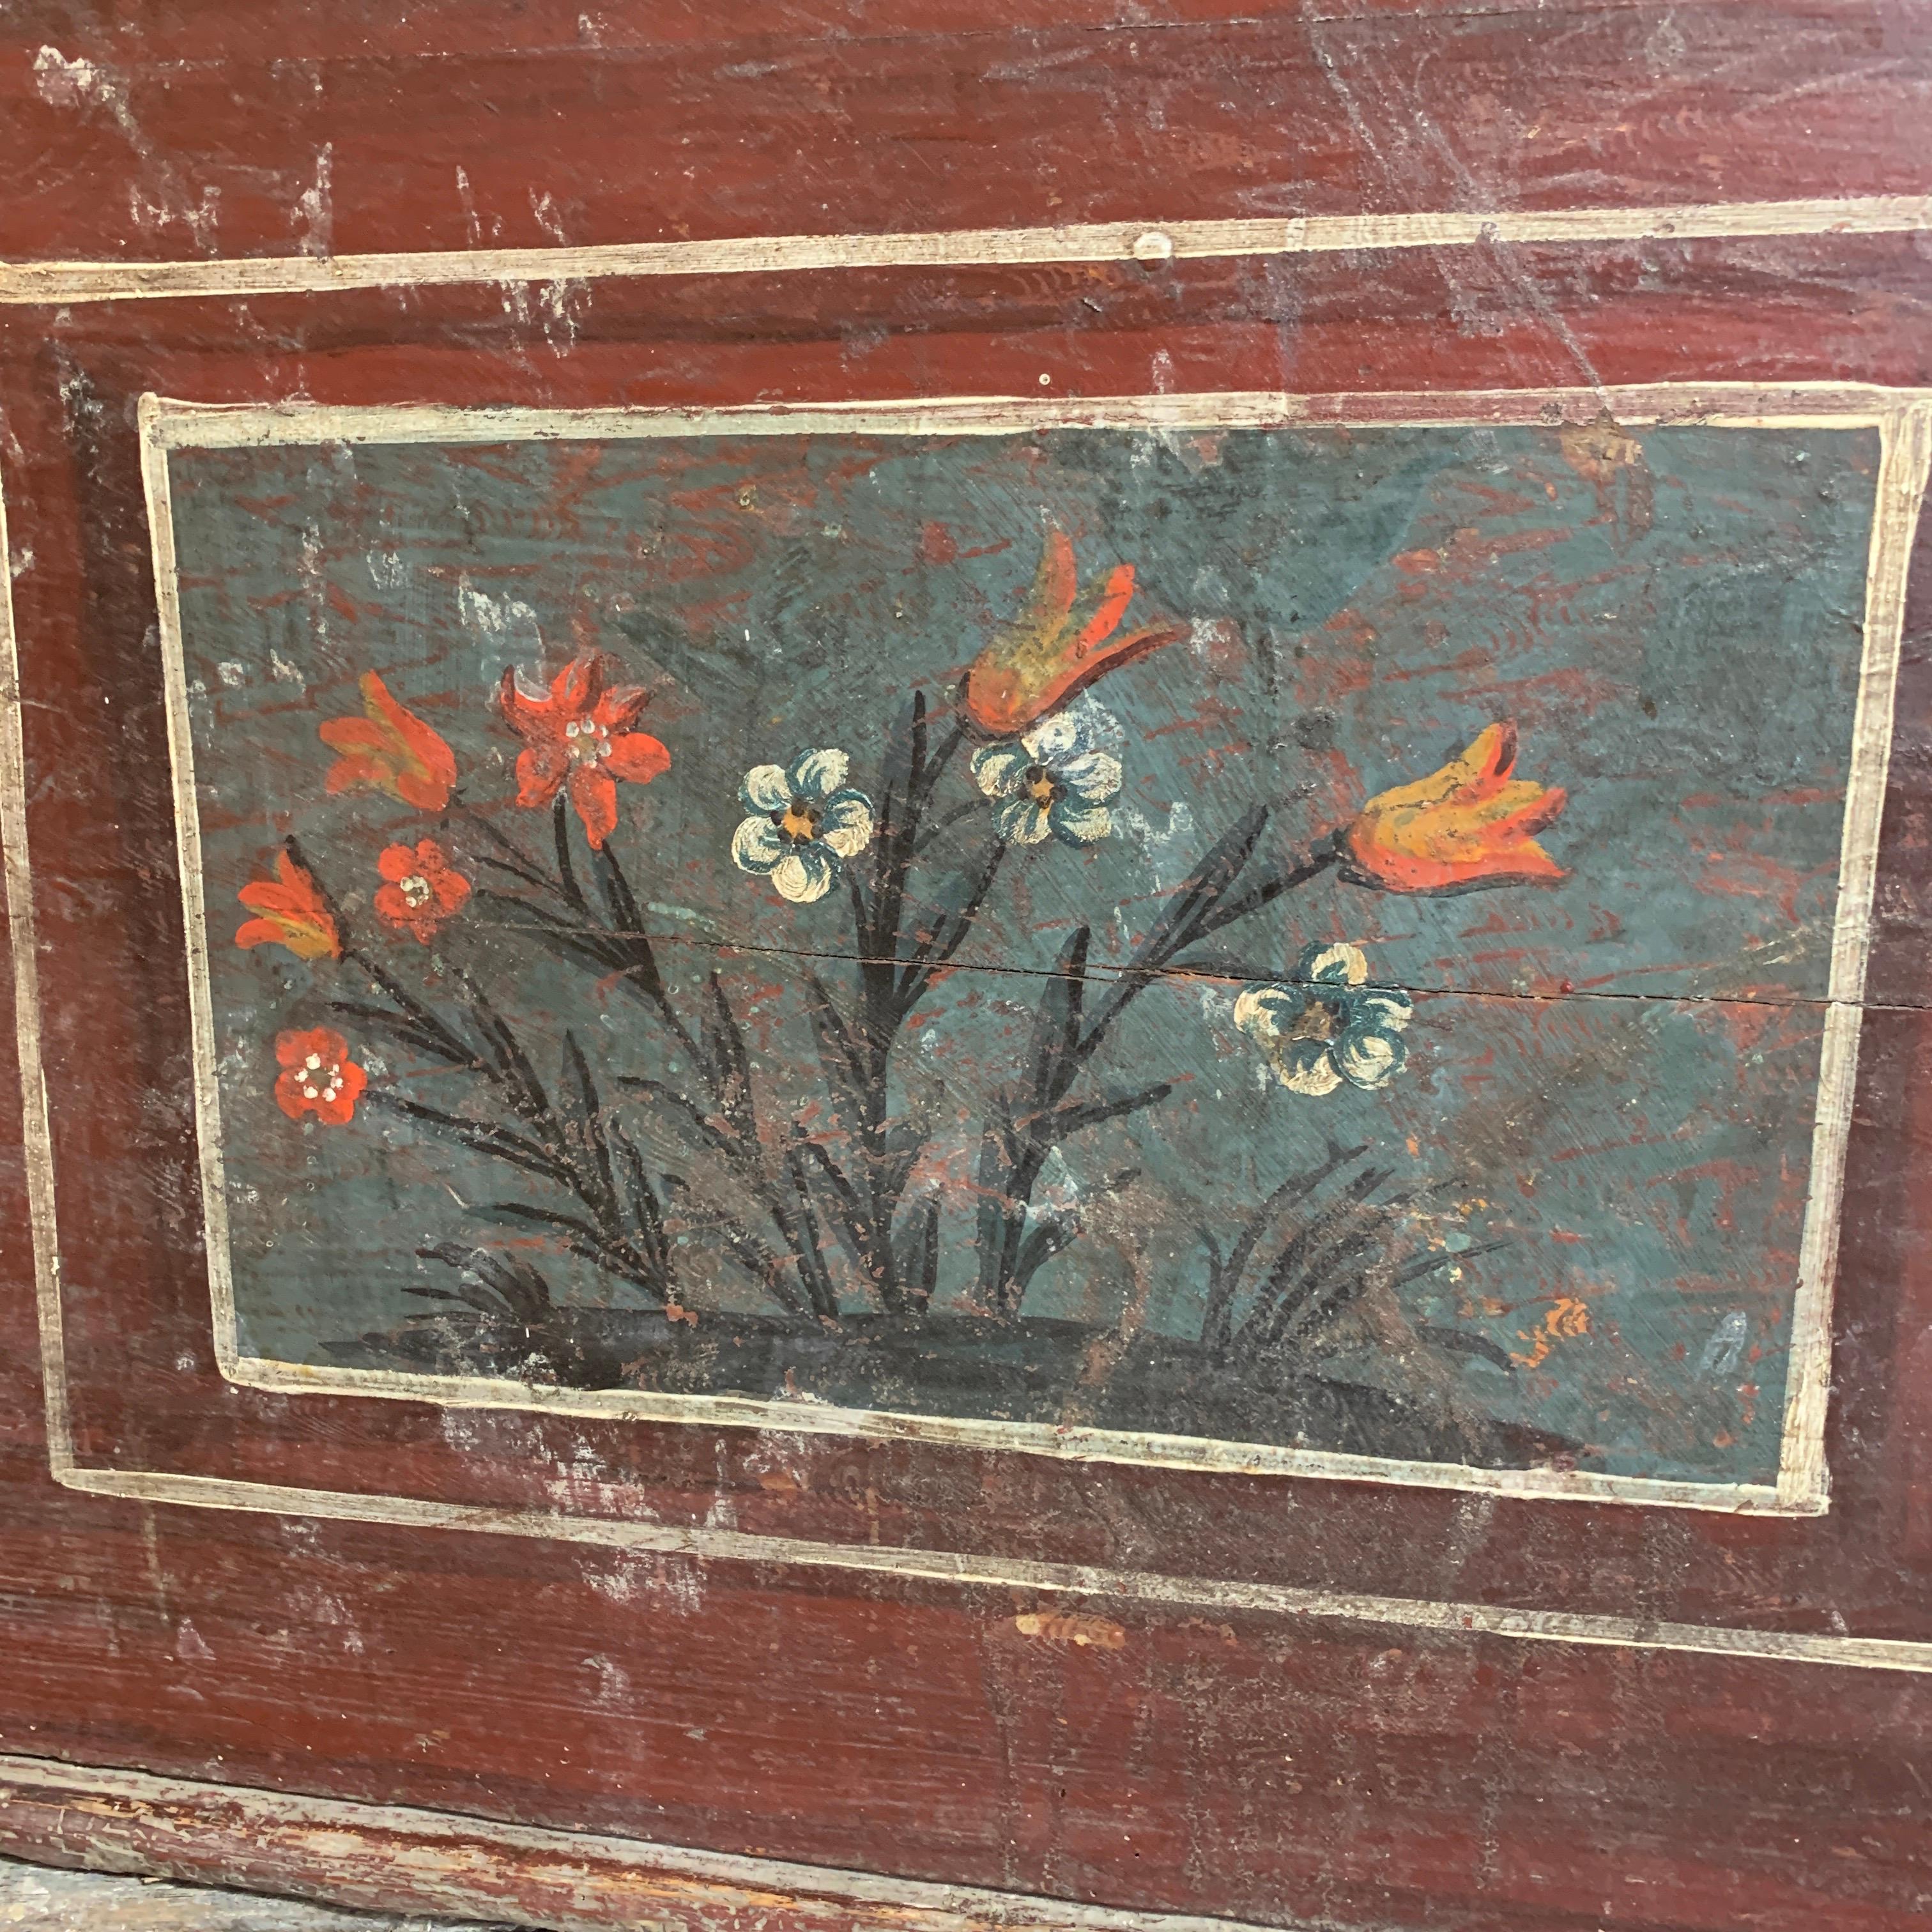 Late 18th century European hand painted marriage chest. The rich dark red base color is highlighted with areas of floral pattern and a heart detail below the lock on the front. Inside the trunk there is a main section plus a small lidded box shelf